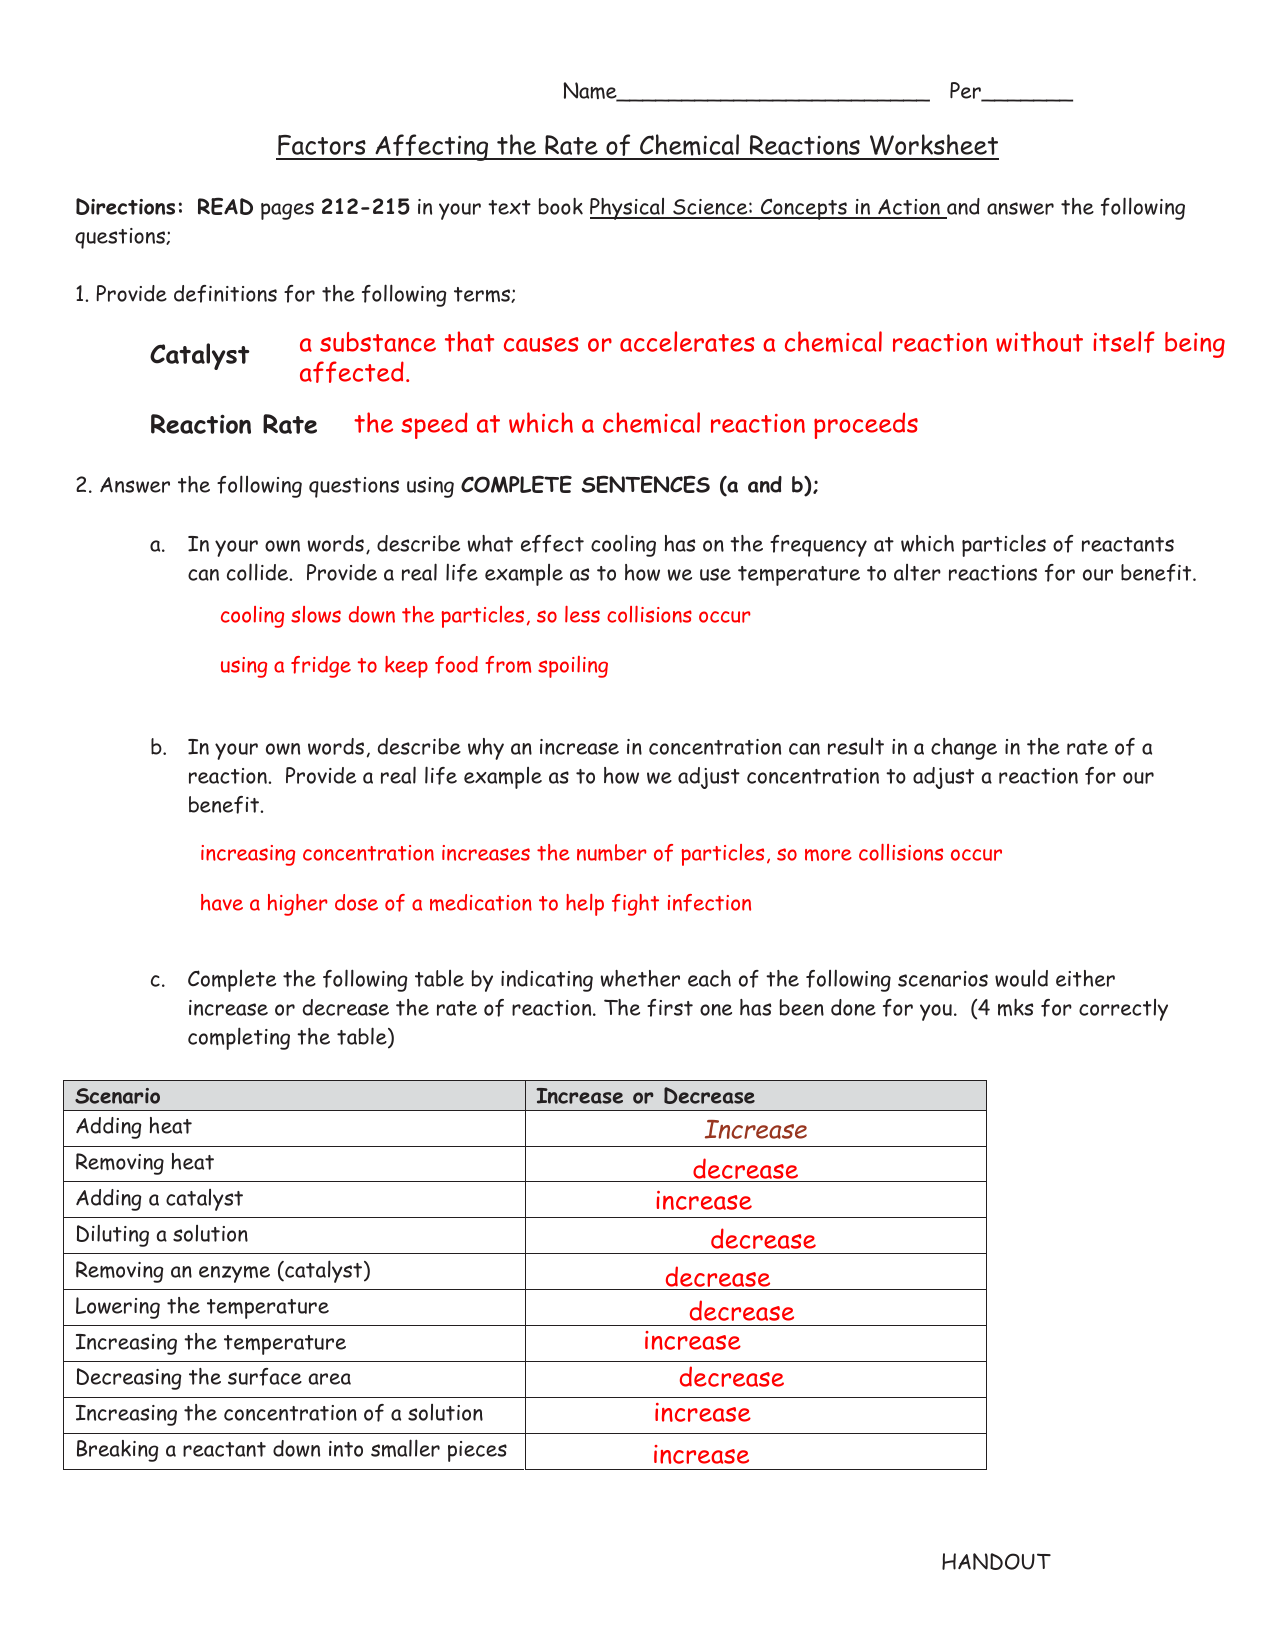 chemical-reactions-worksheet-answers